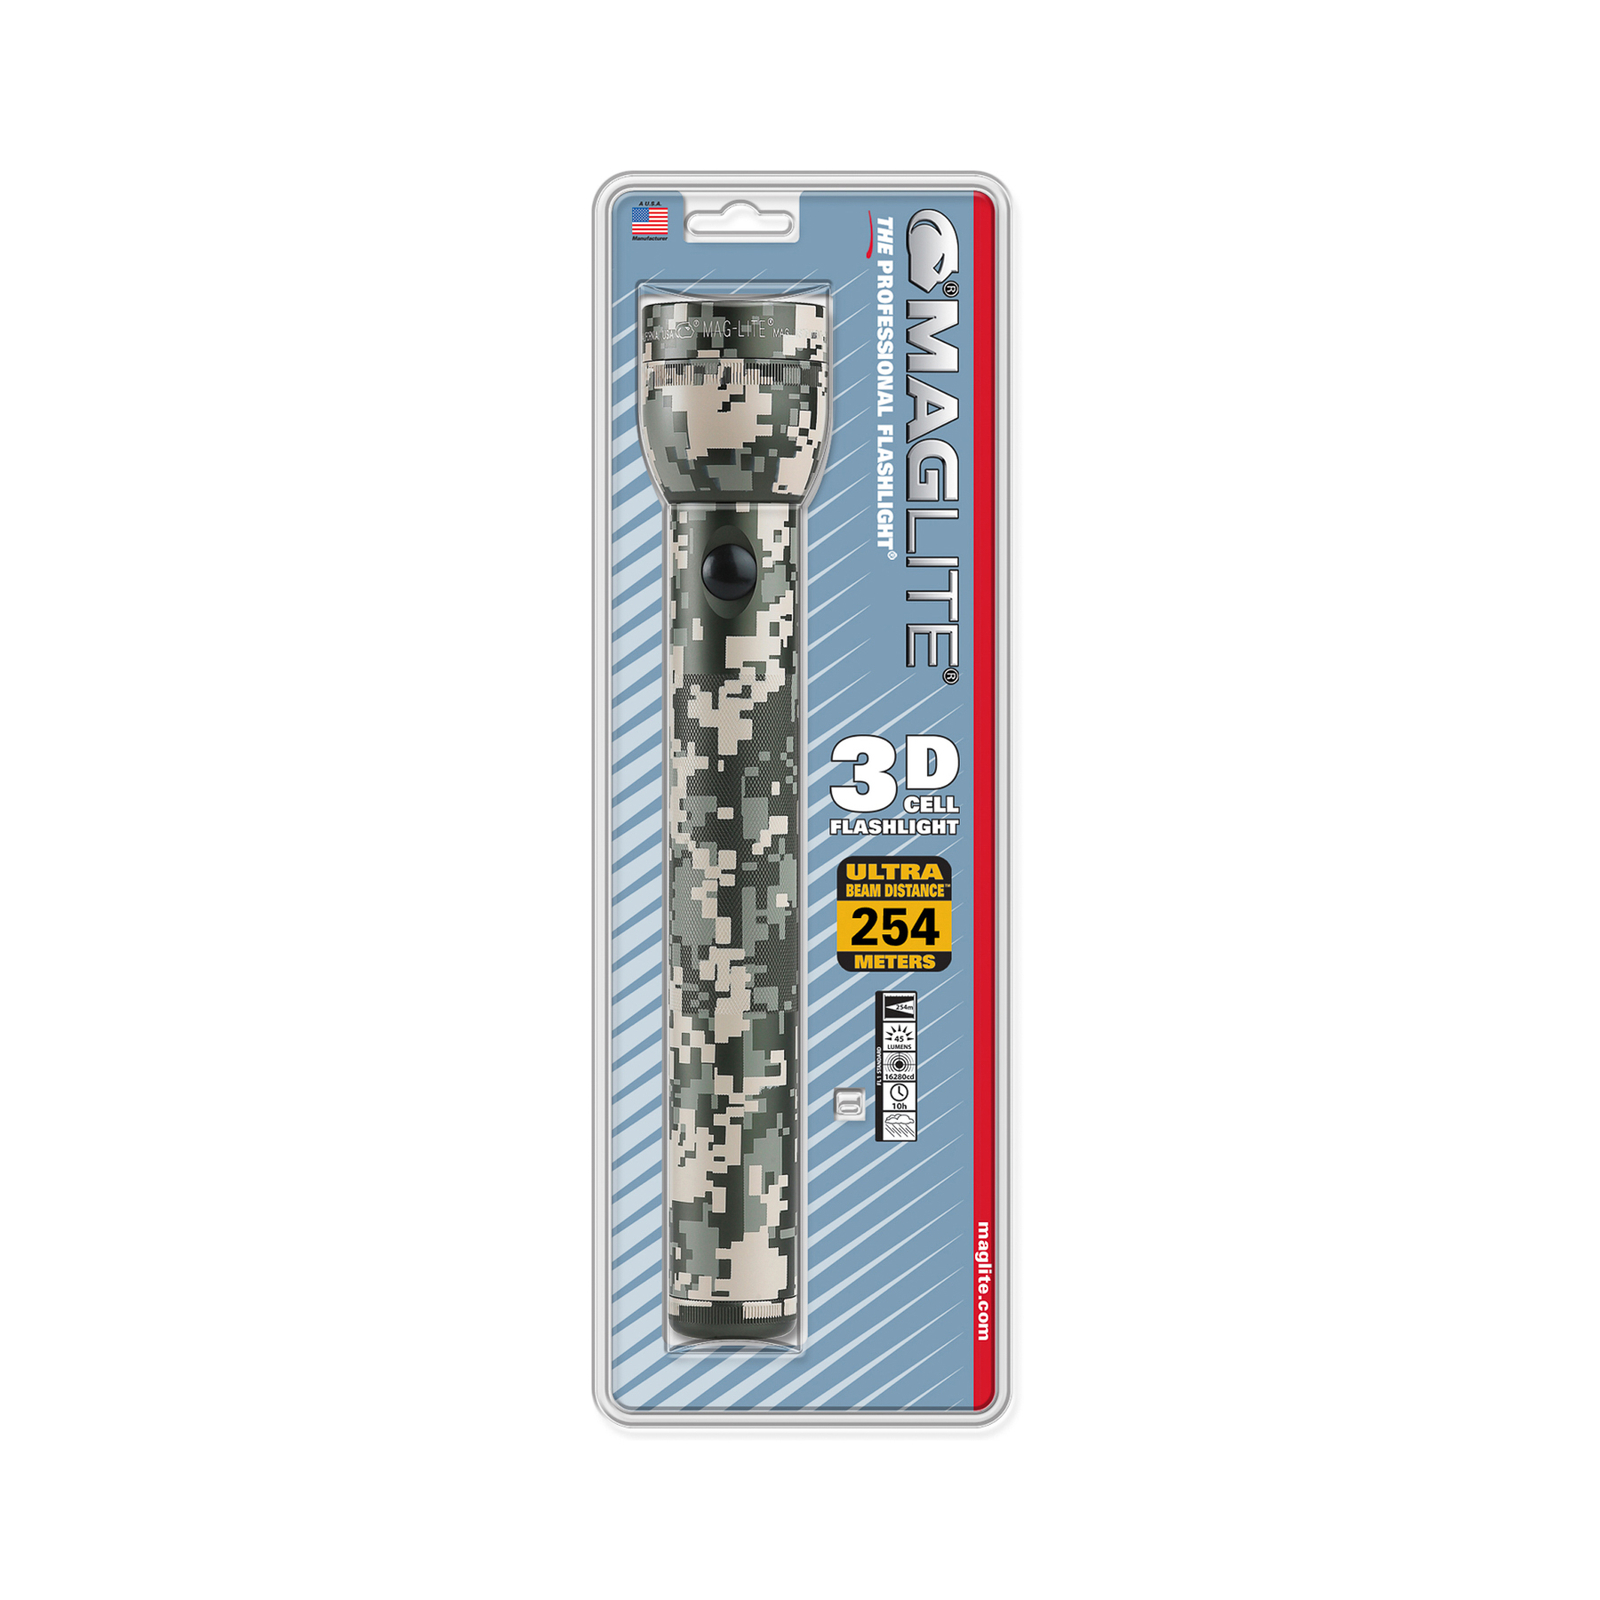 Maglite Xenon torch S3DMR, 3-Cell D, camouflage